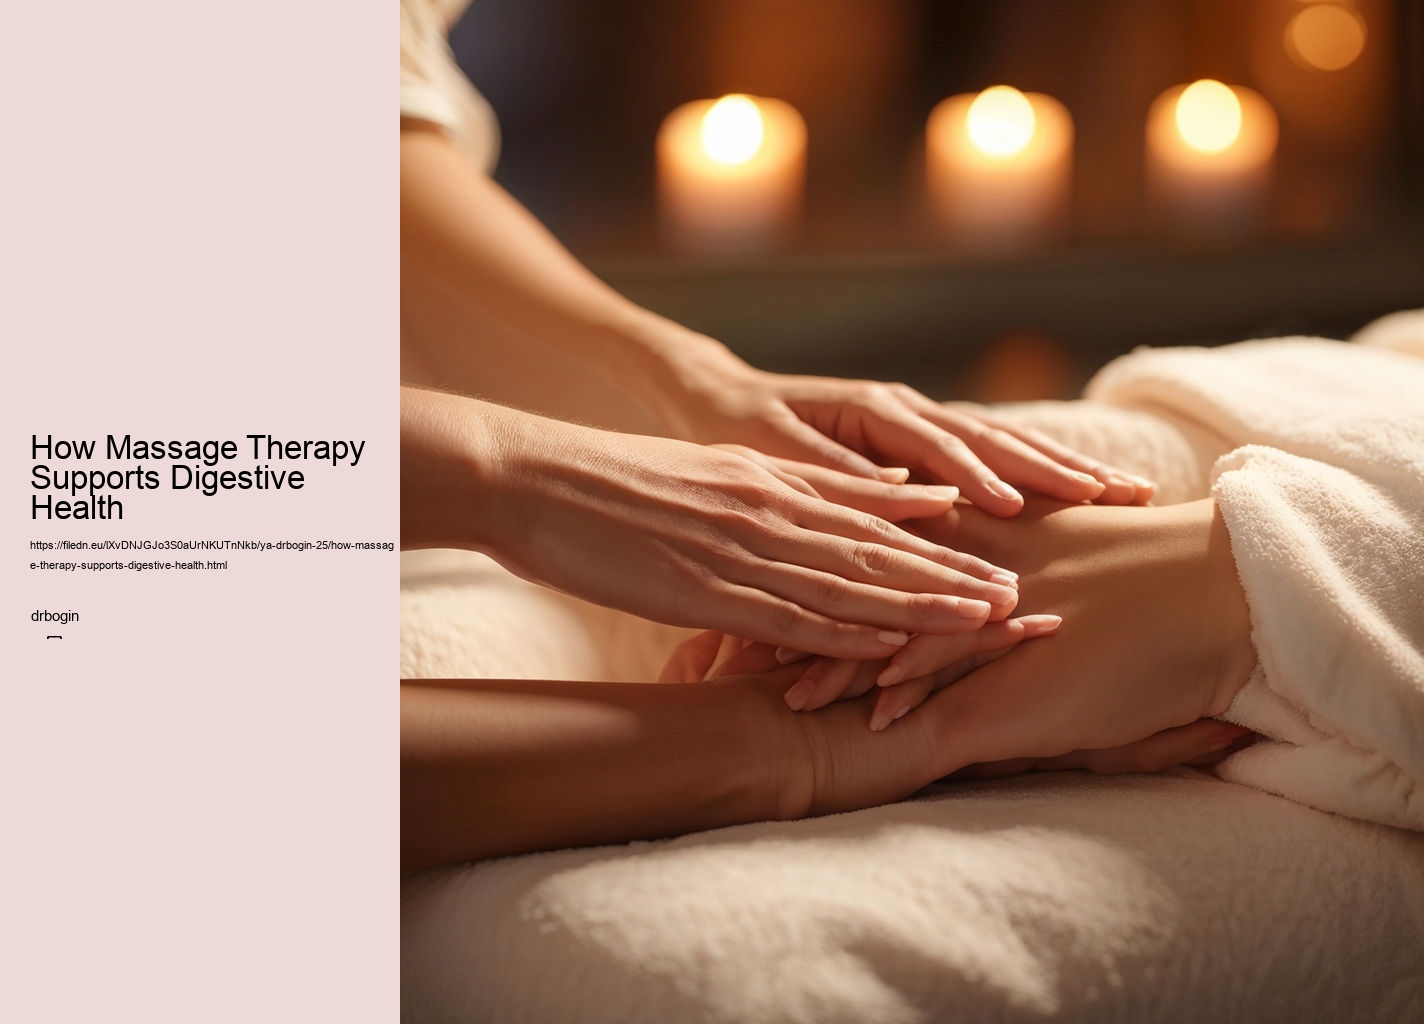 How Massage Therapy Supports Digestive Health